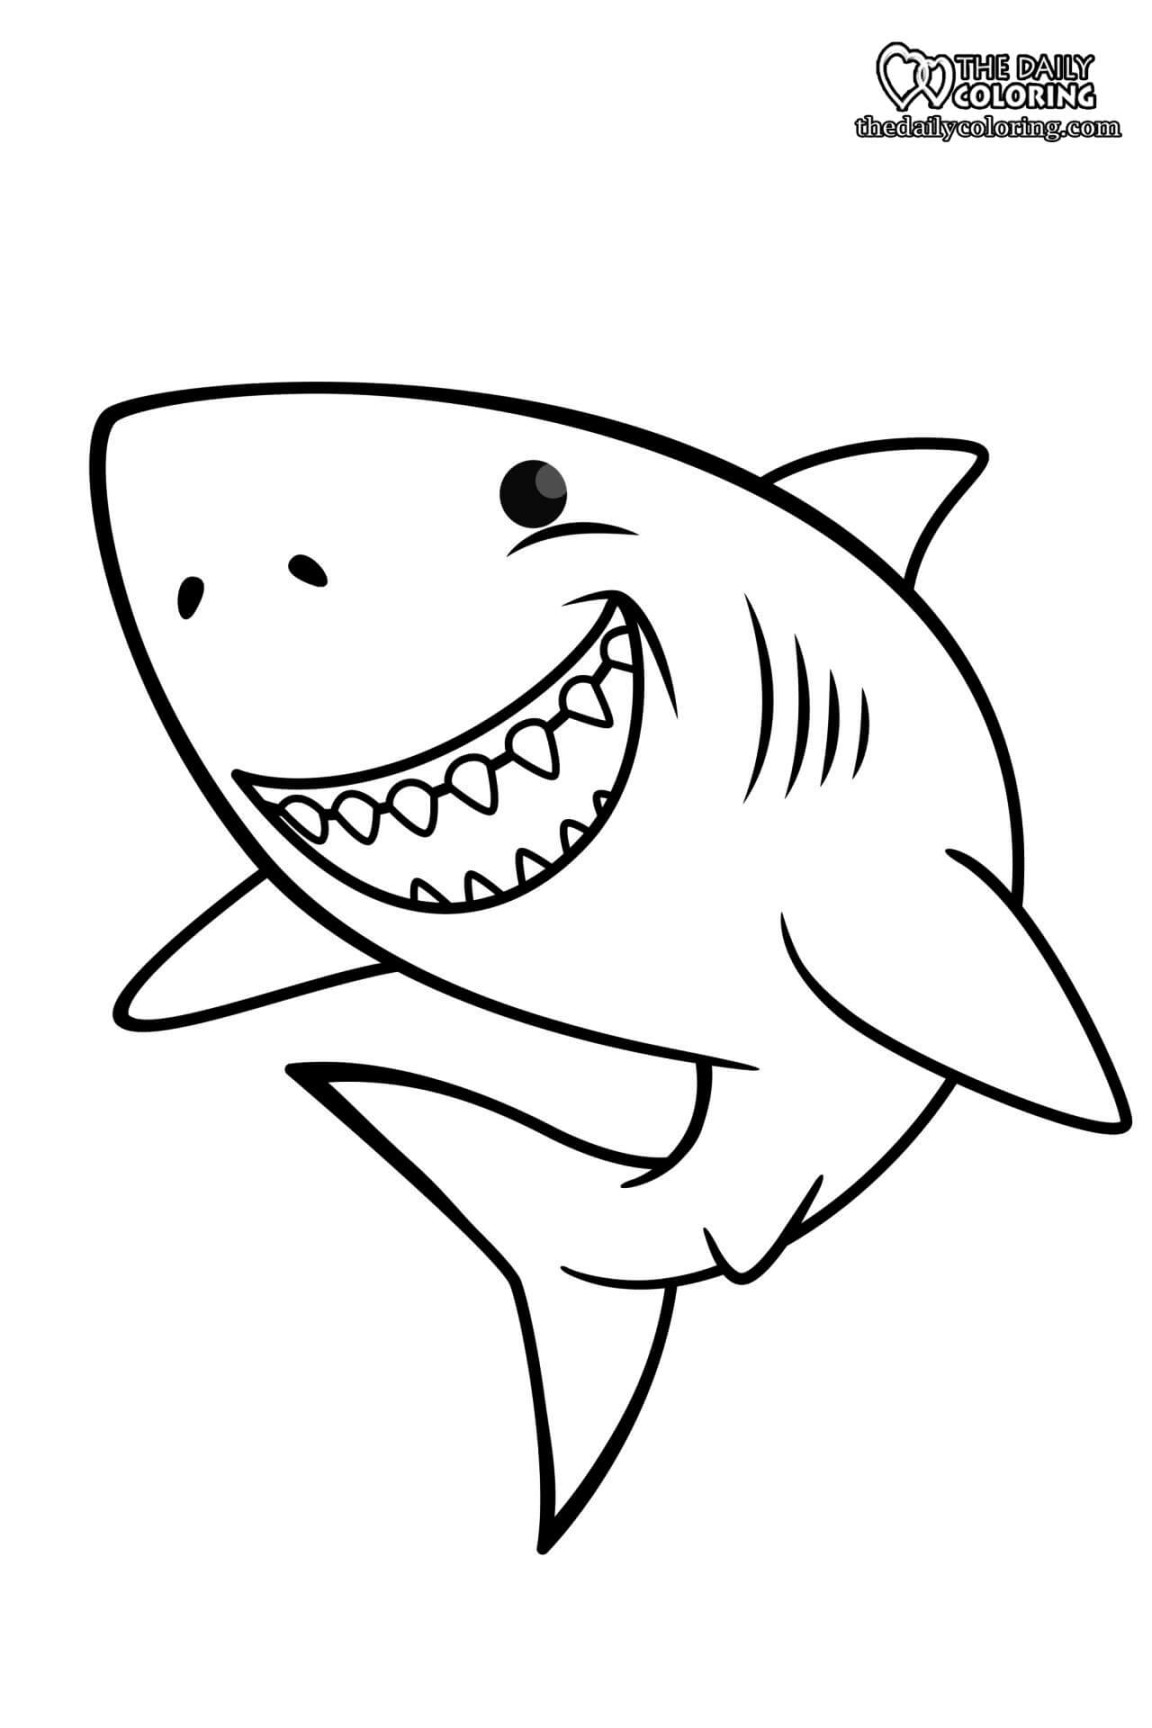 Shark Coloring Pages - The Daily Coloring